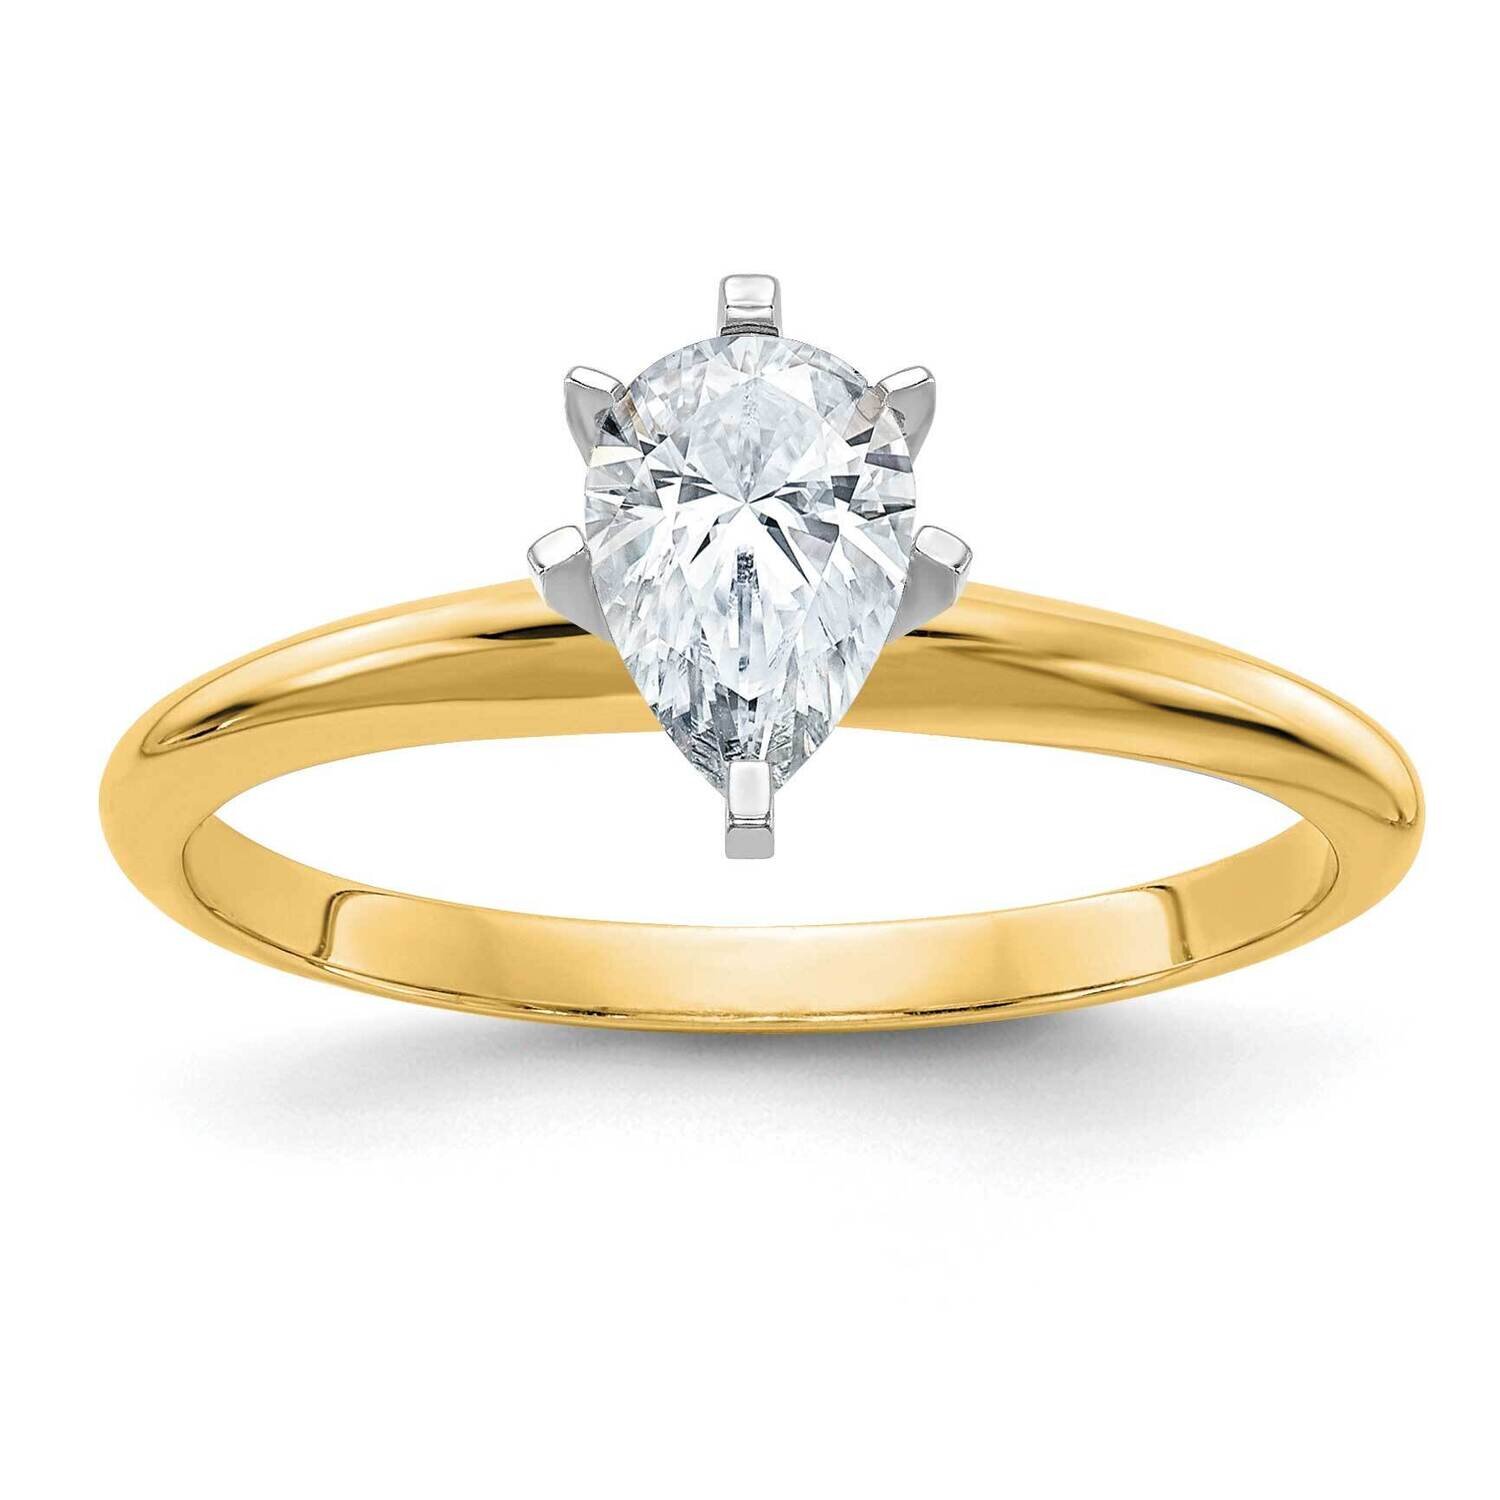 7/8ct. D E F Pure Light Pear Moissanite Solitaire Ring 14k Gold YGSH15A-12MP-7